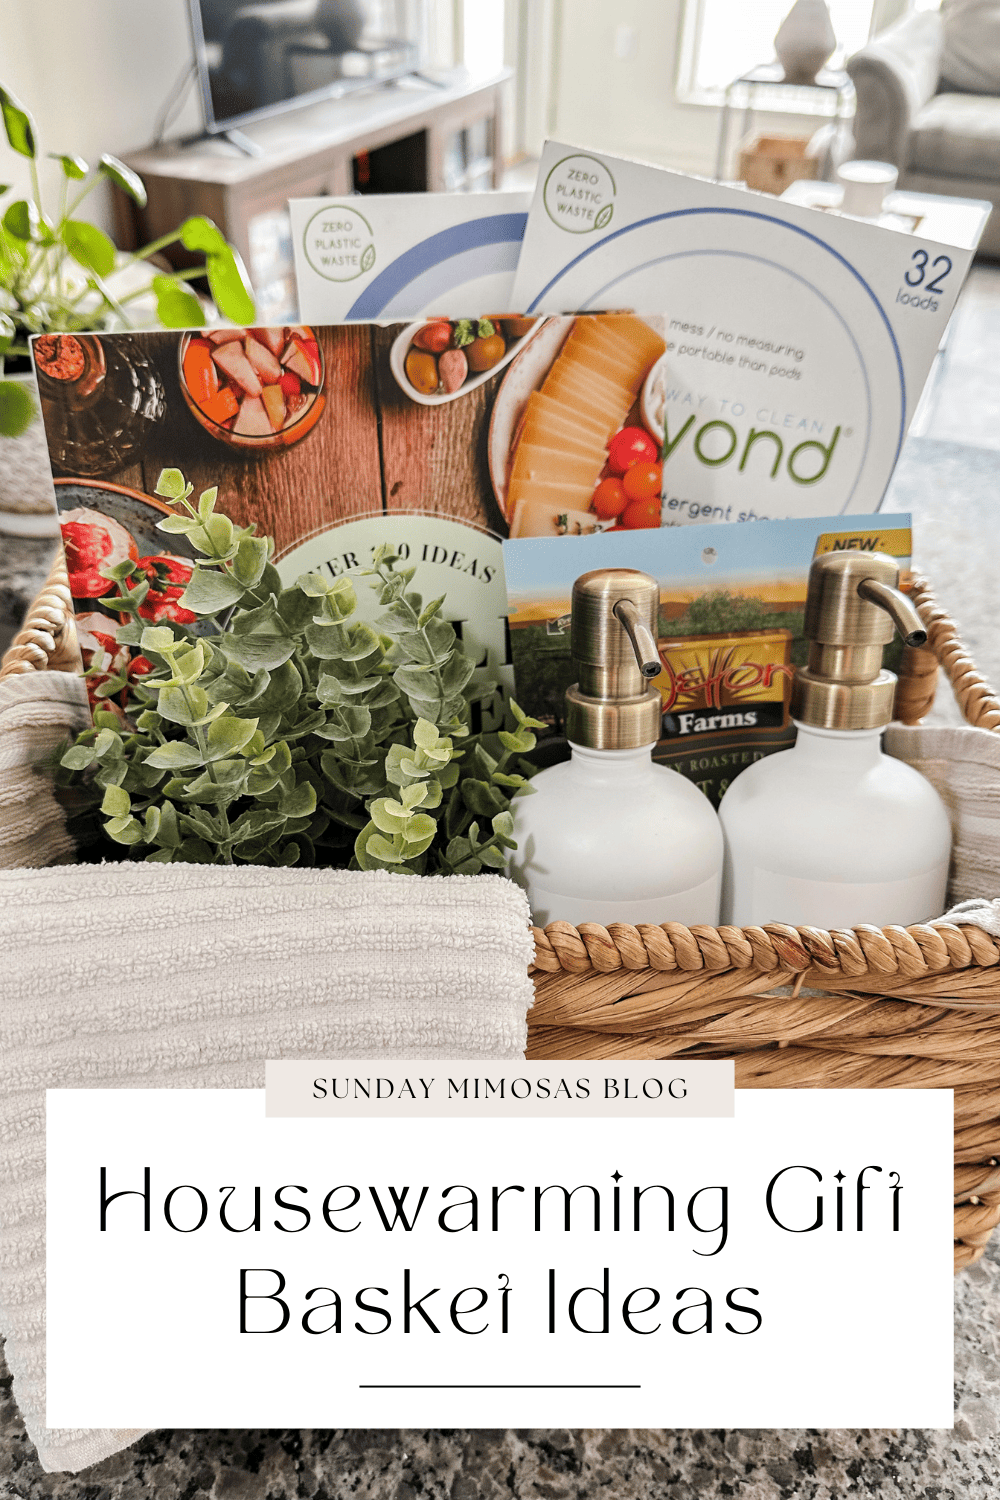 A perfect gift for newlyweds or any couple. (Housewarming gift too!) A cozy  morning gift basket idea.